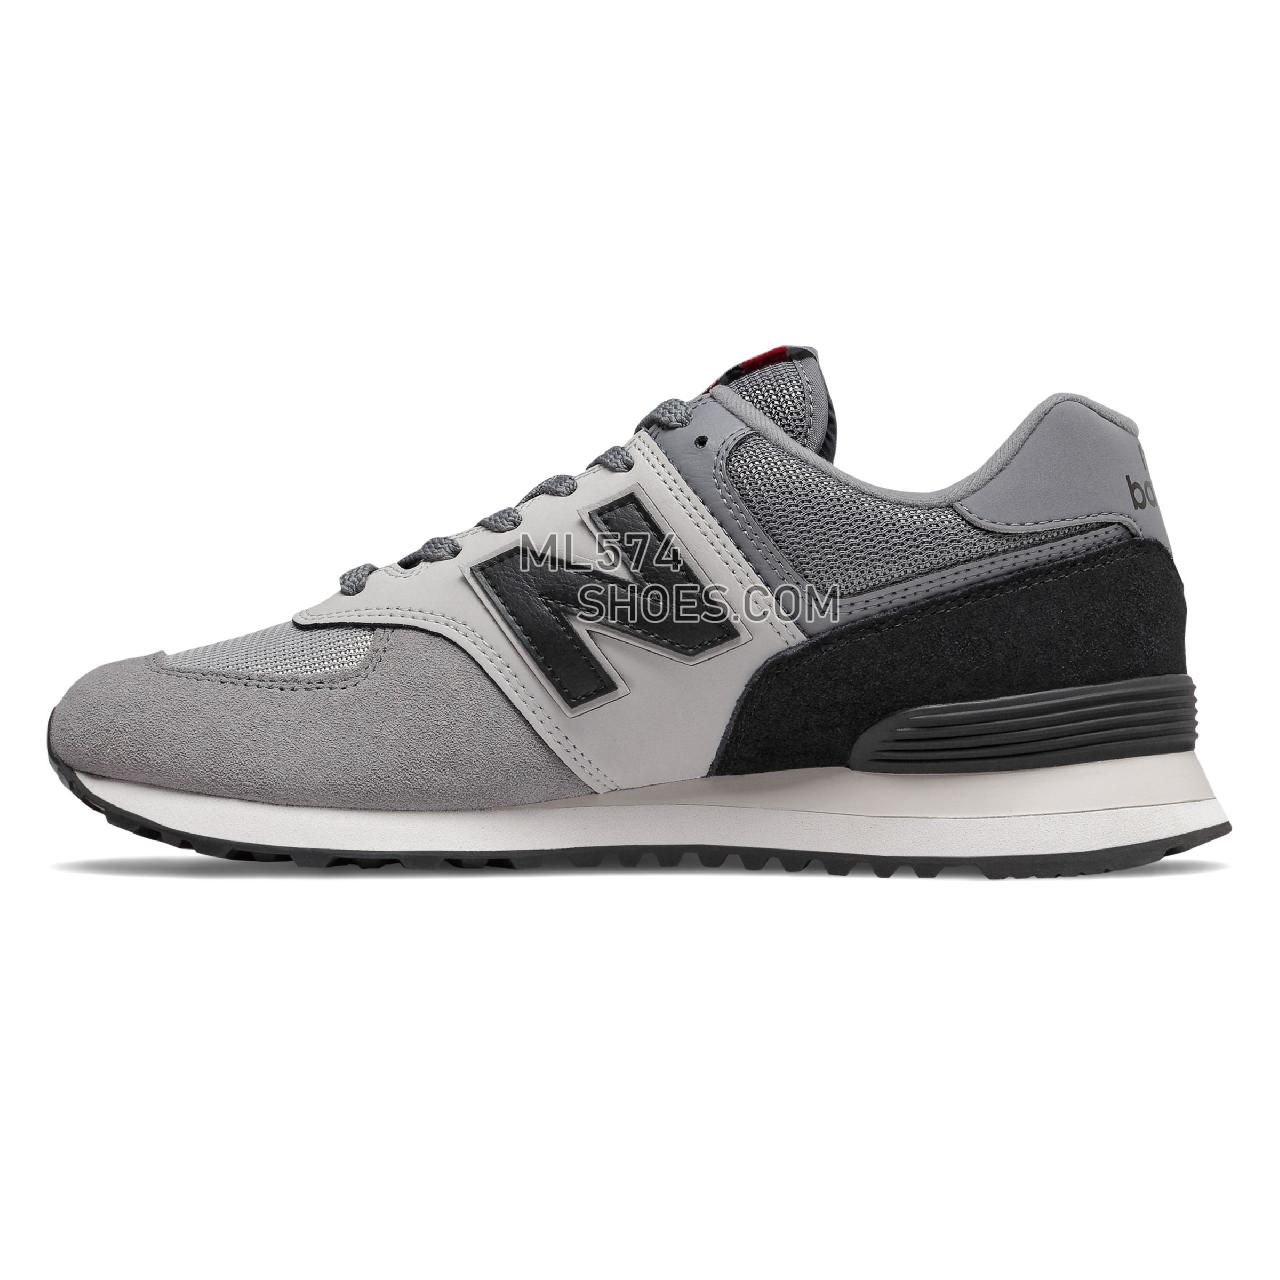 New Balance 574 - Men's Classic Sneakers - Marblehead with Black - ML574JHV